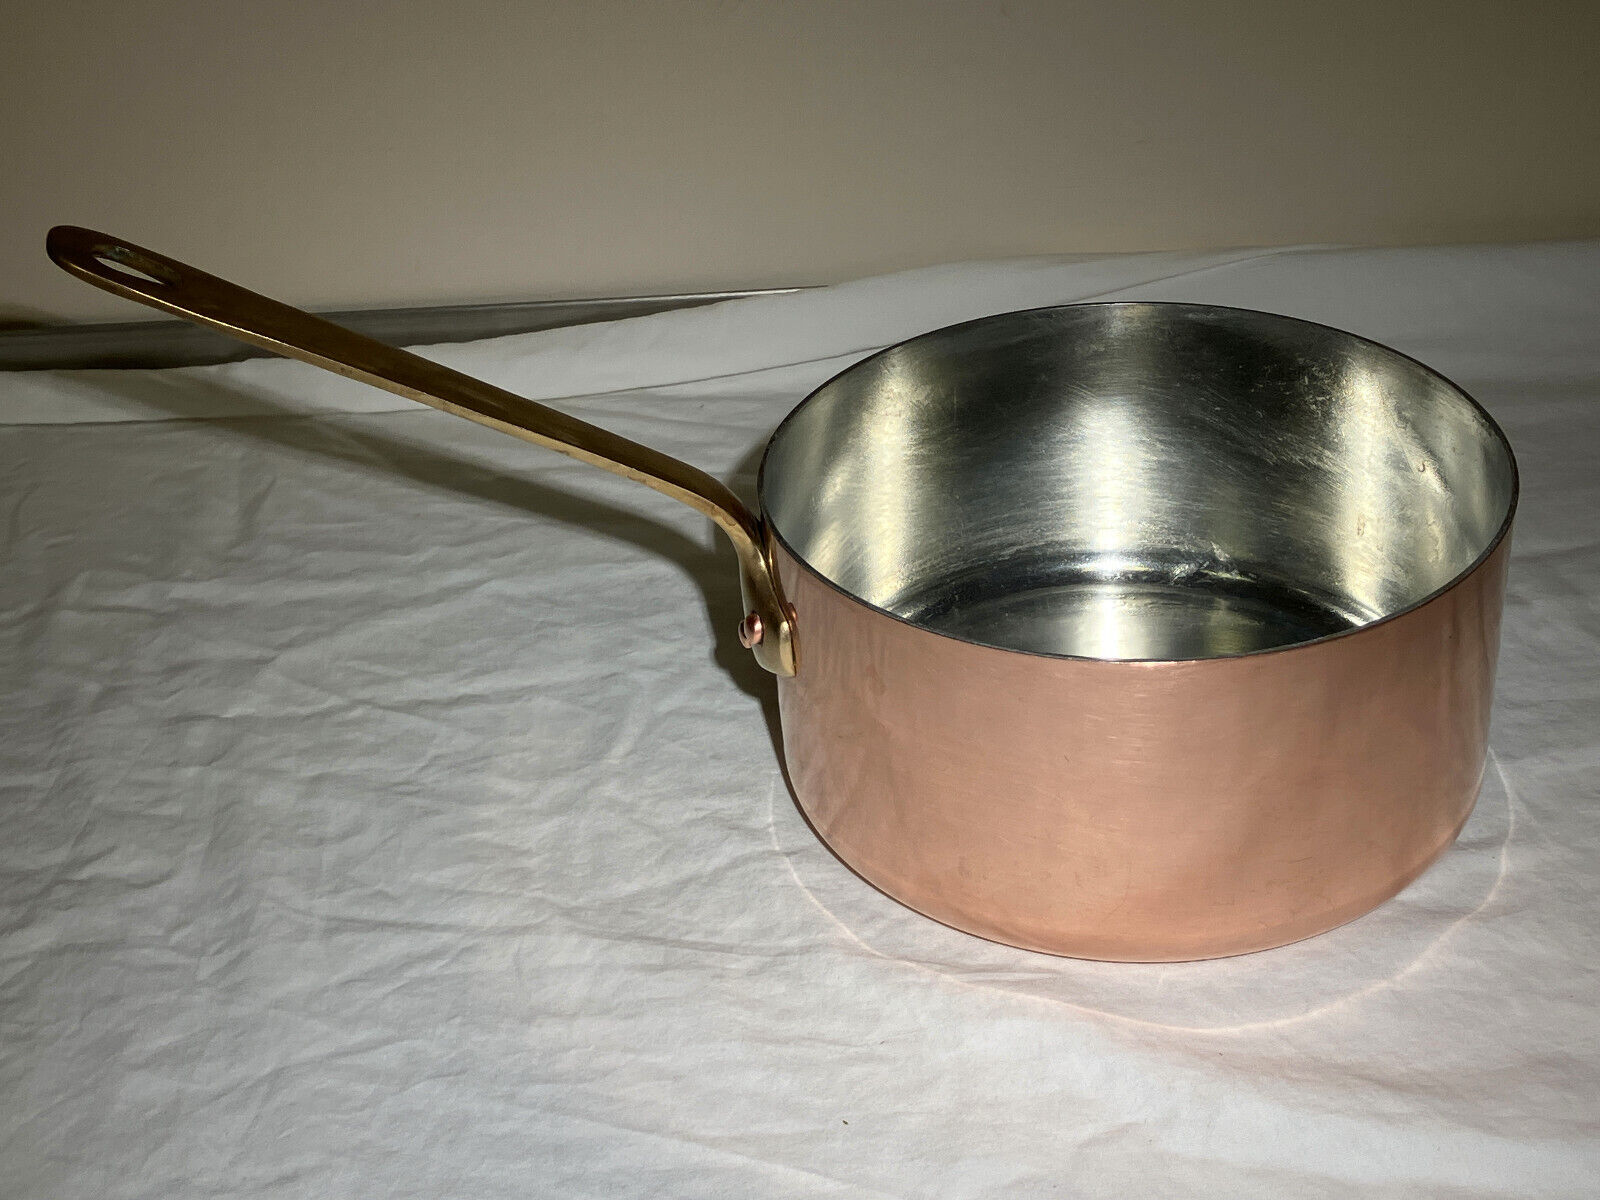 Vintage Copper Saucepan NEW TIN 7.9-in/20cm 2mm thick Made in France - Mauviel?